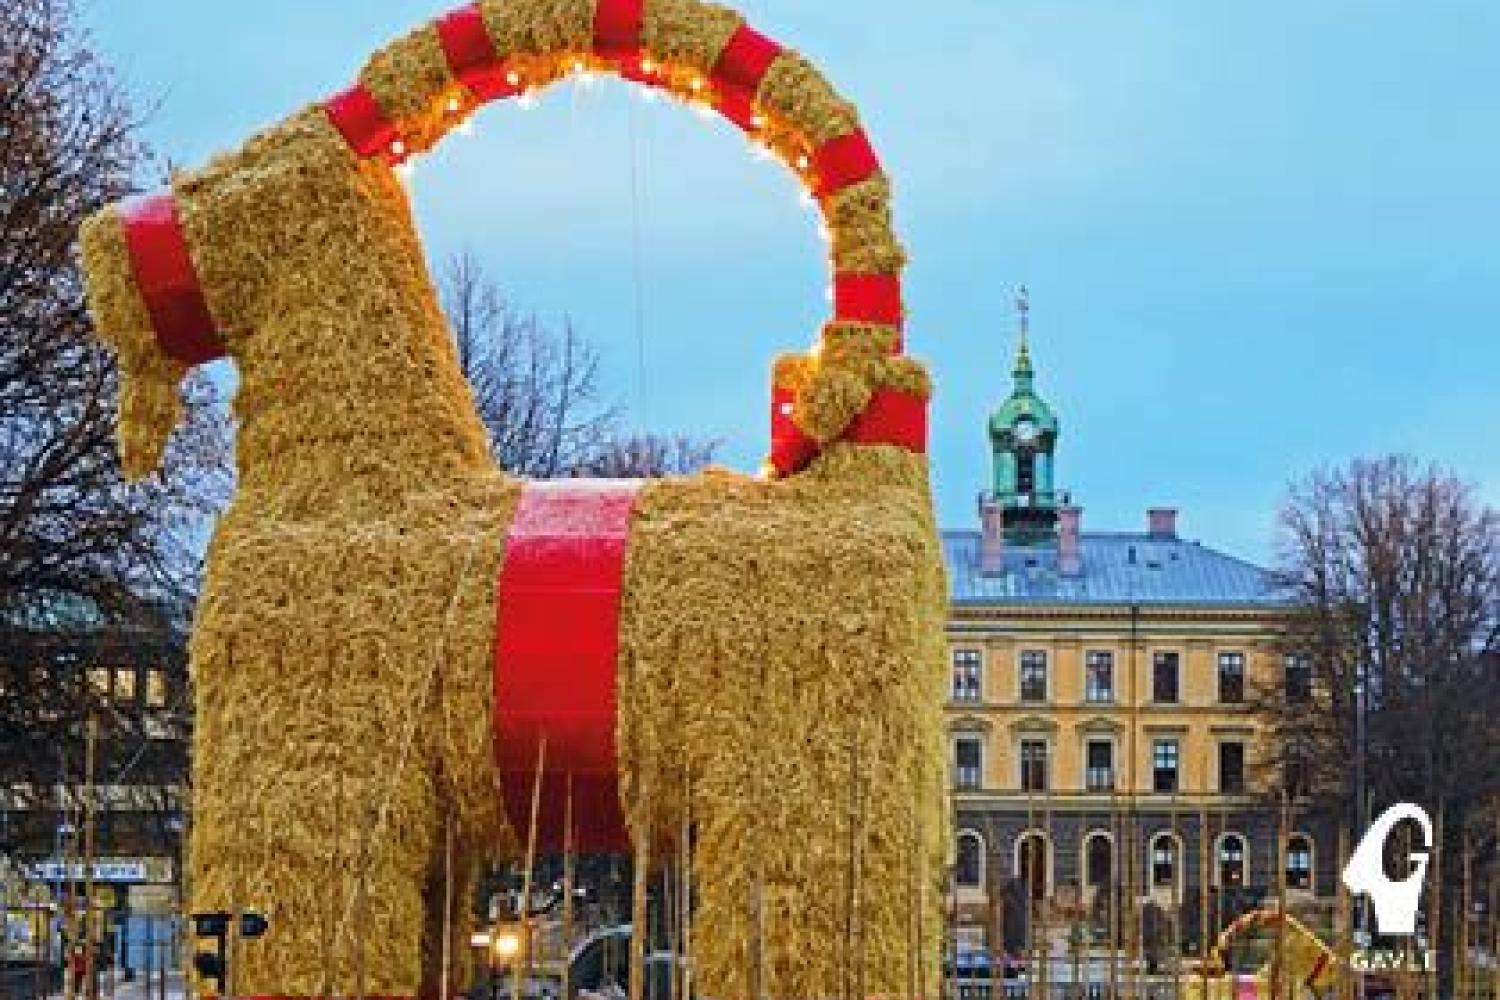 Two post cards – the Gävle Goat